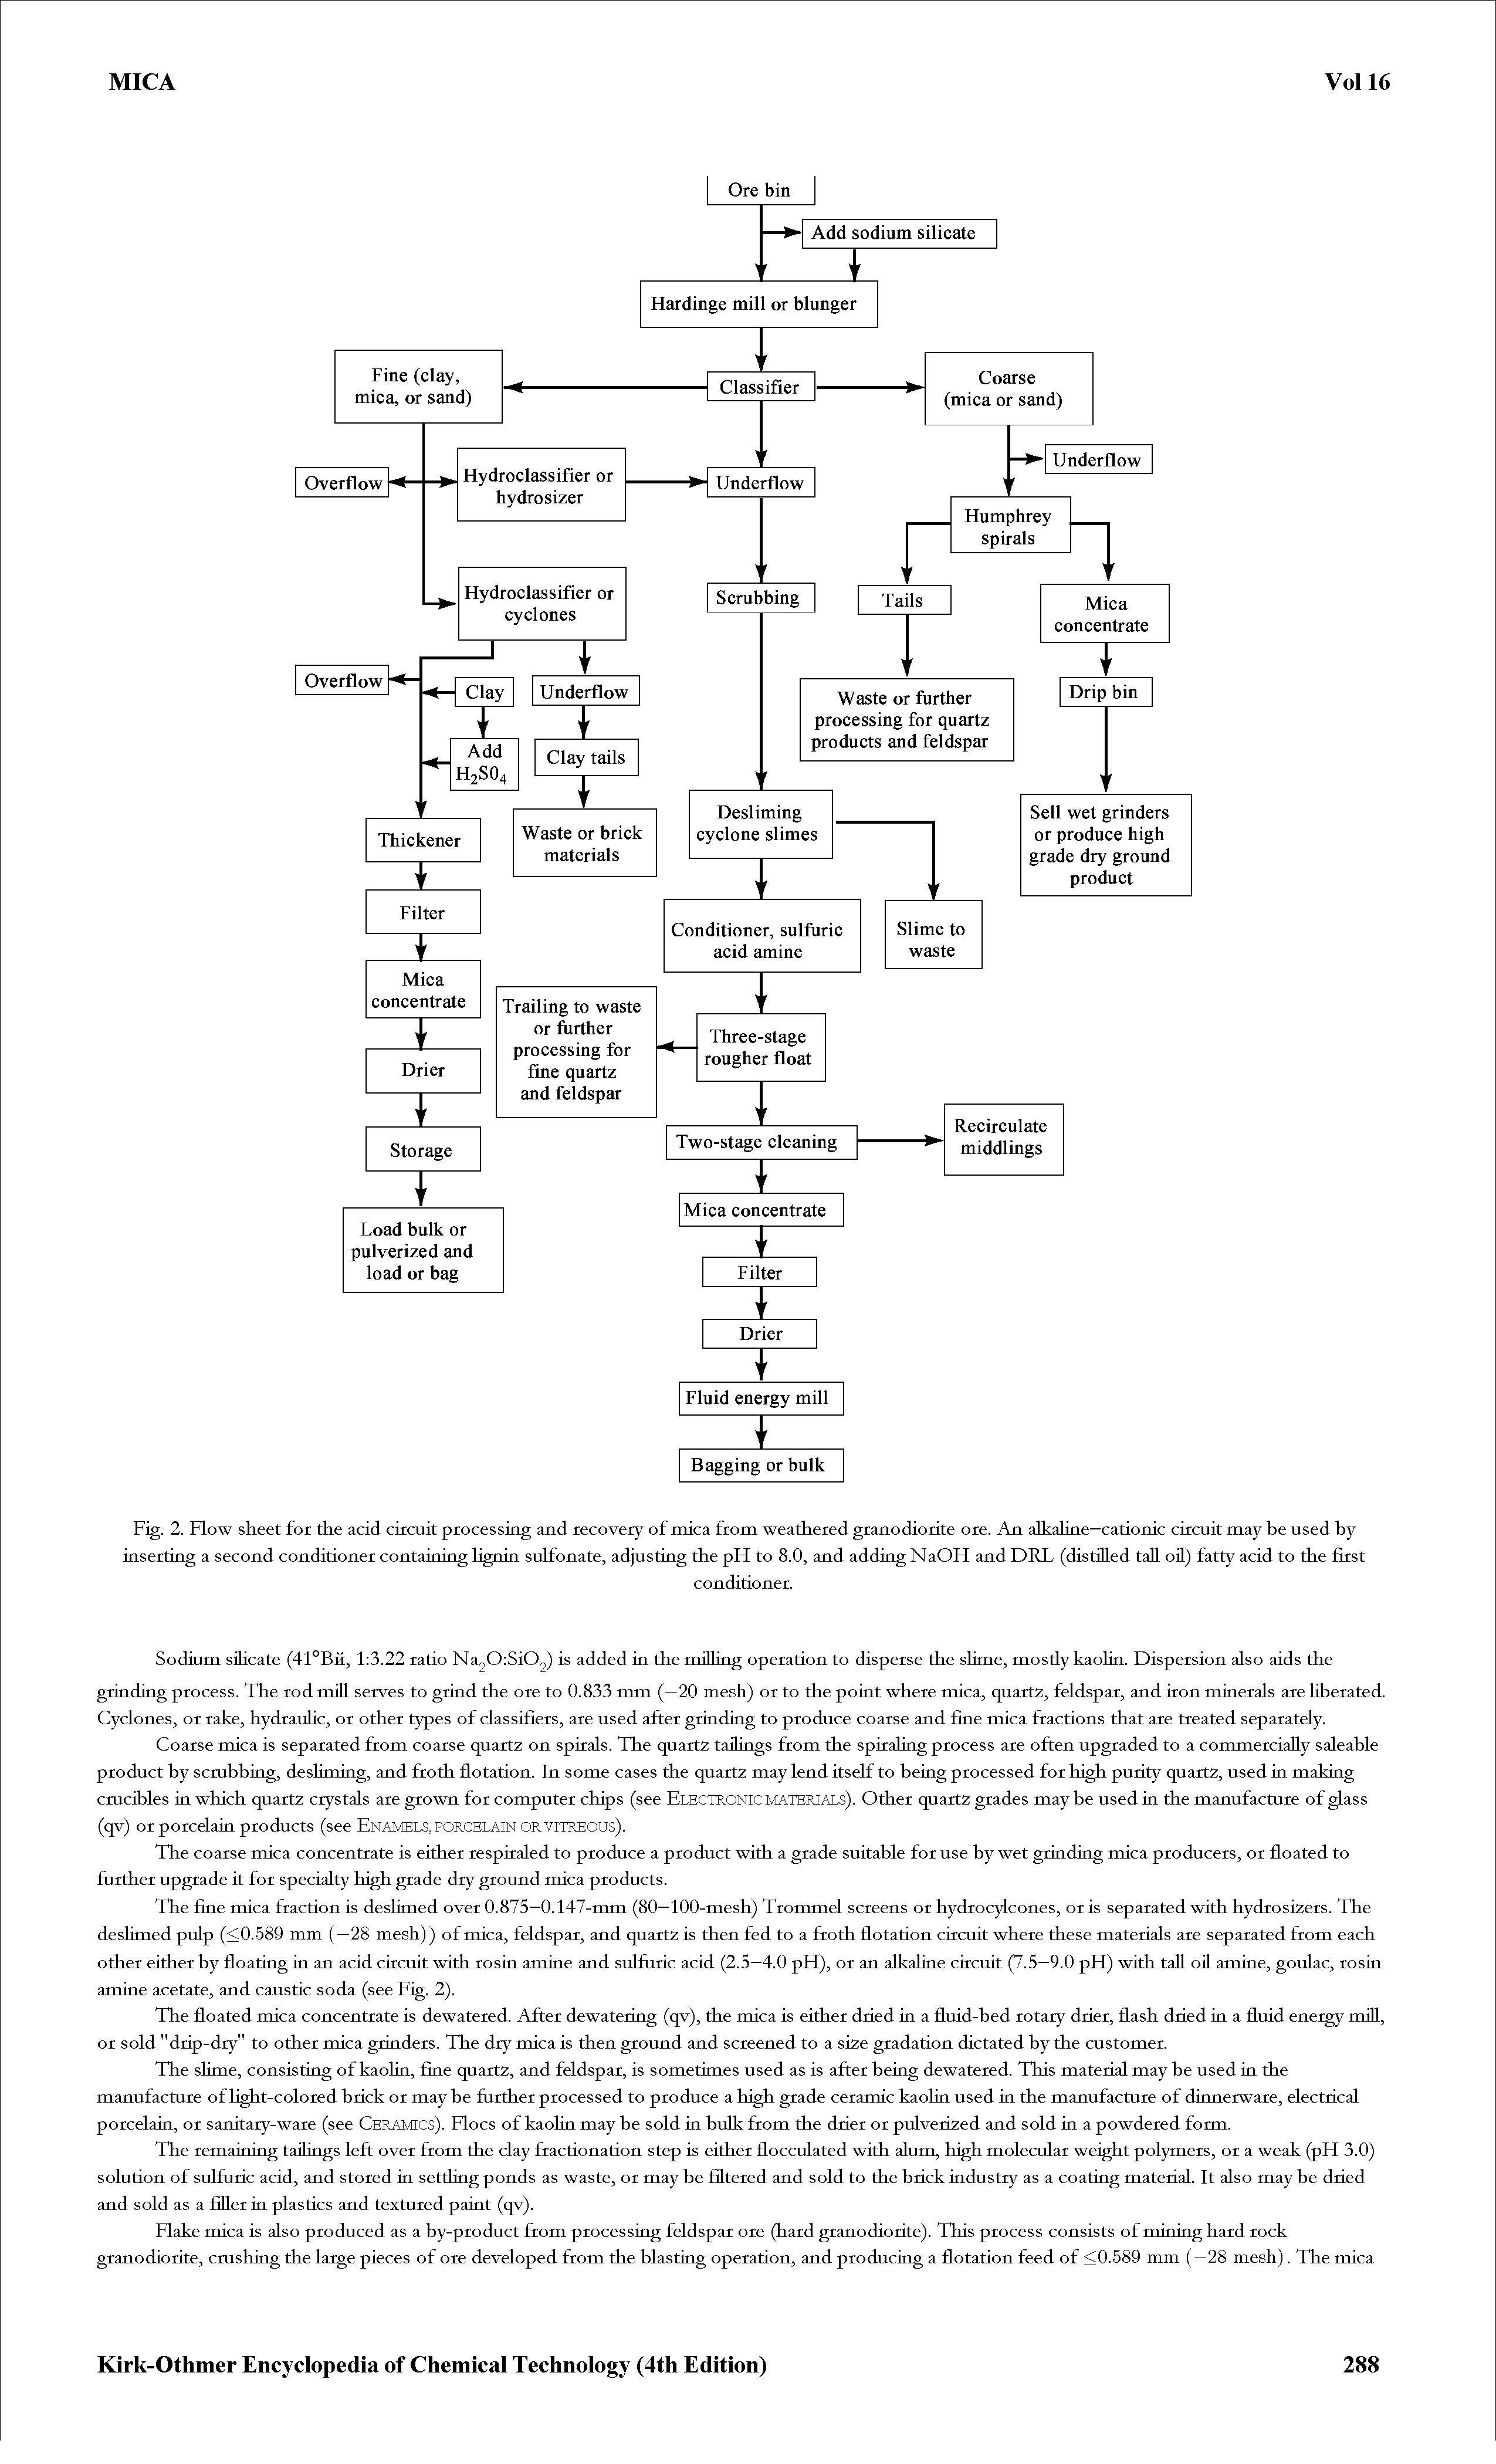 Fig. 2. Flow sheet for the acid circuit processing and recovery of mica from weathered granodiorite ore. An alkaline—cationic circuit may be used by inserting a second conditioner containing lignin sulfonate, adjusting the pH to 8.0, and adding NaOH and DRL (distilled tall oil) fatty acid to the first...